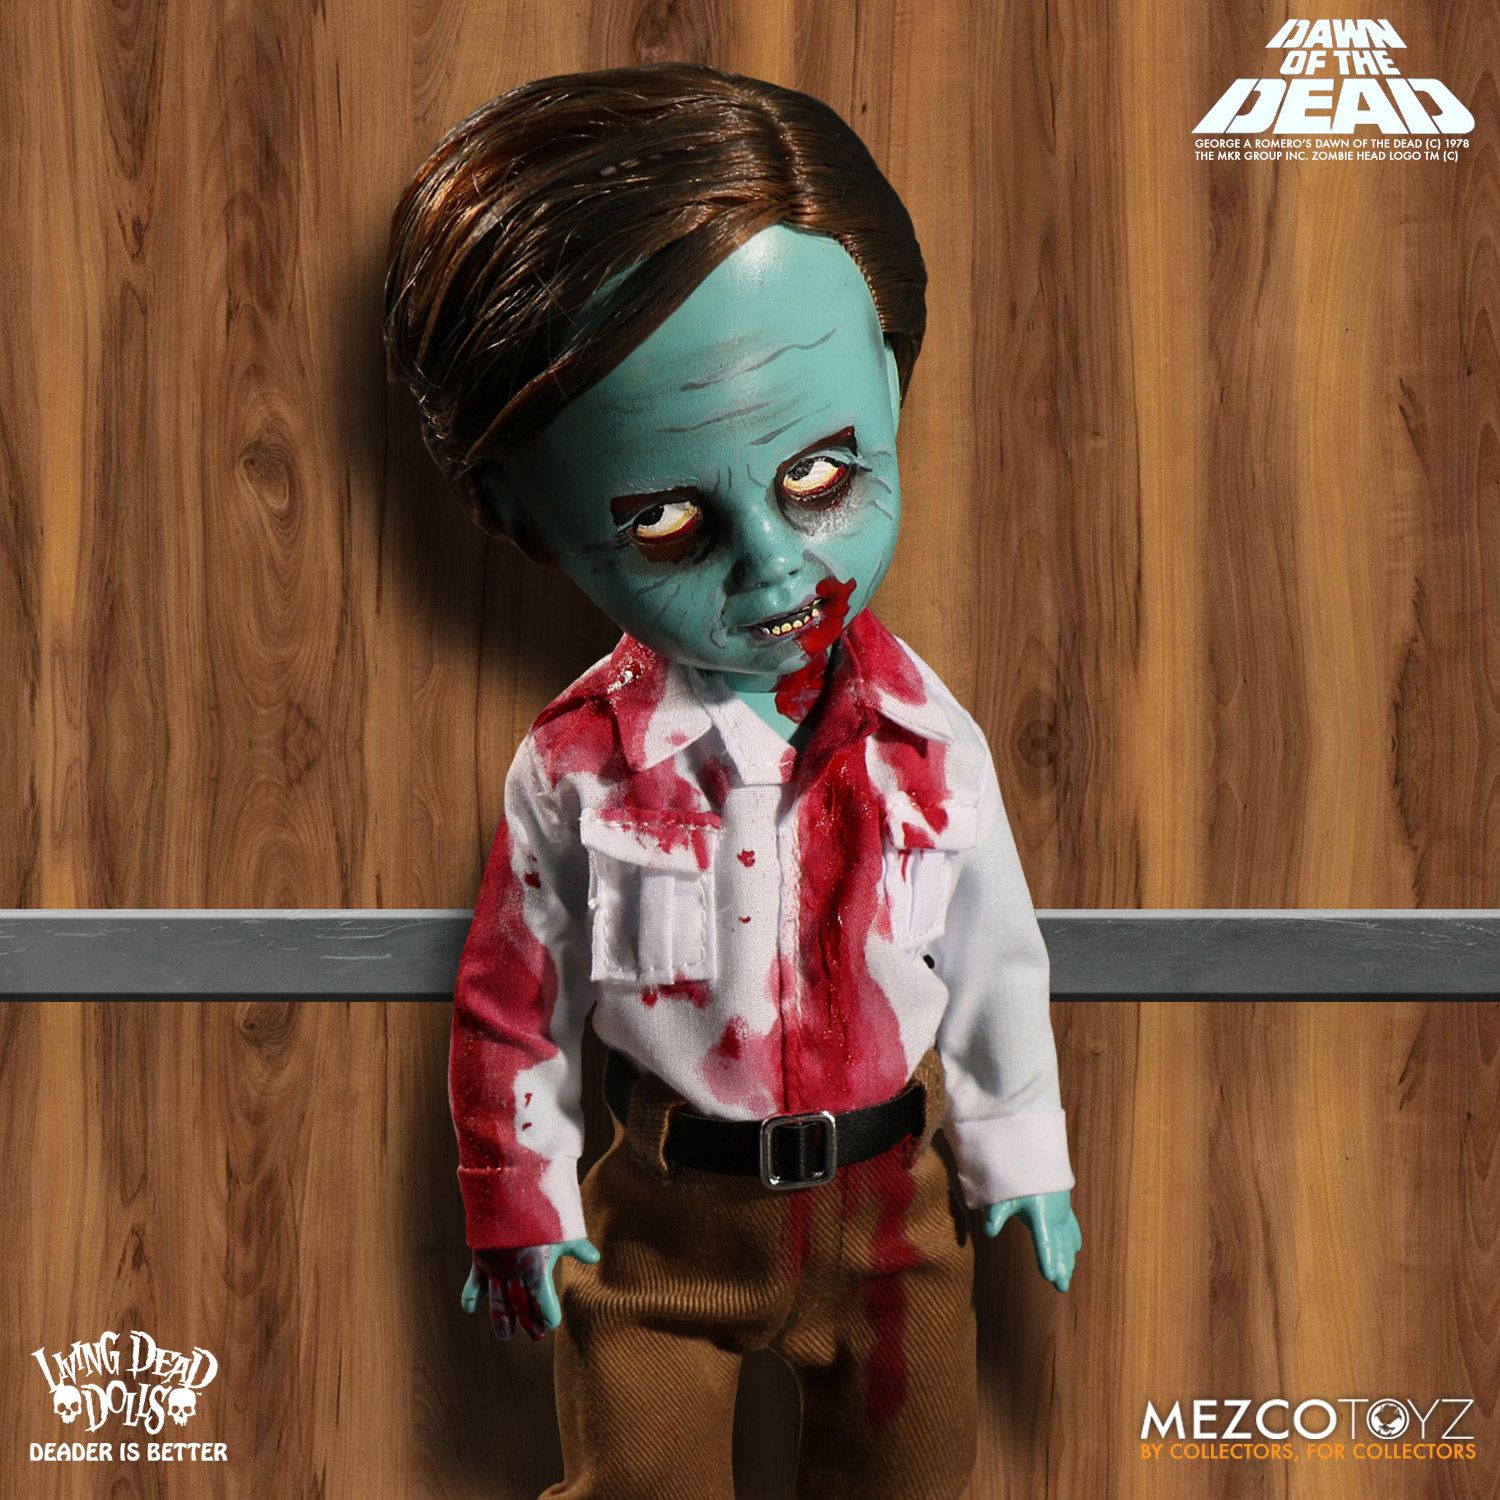 Flyboy and Plaid Shirt Zombie Dawn of the Dead Living Dead Dolls 